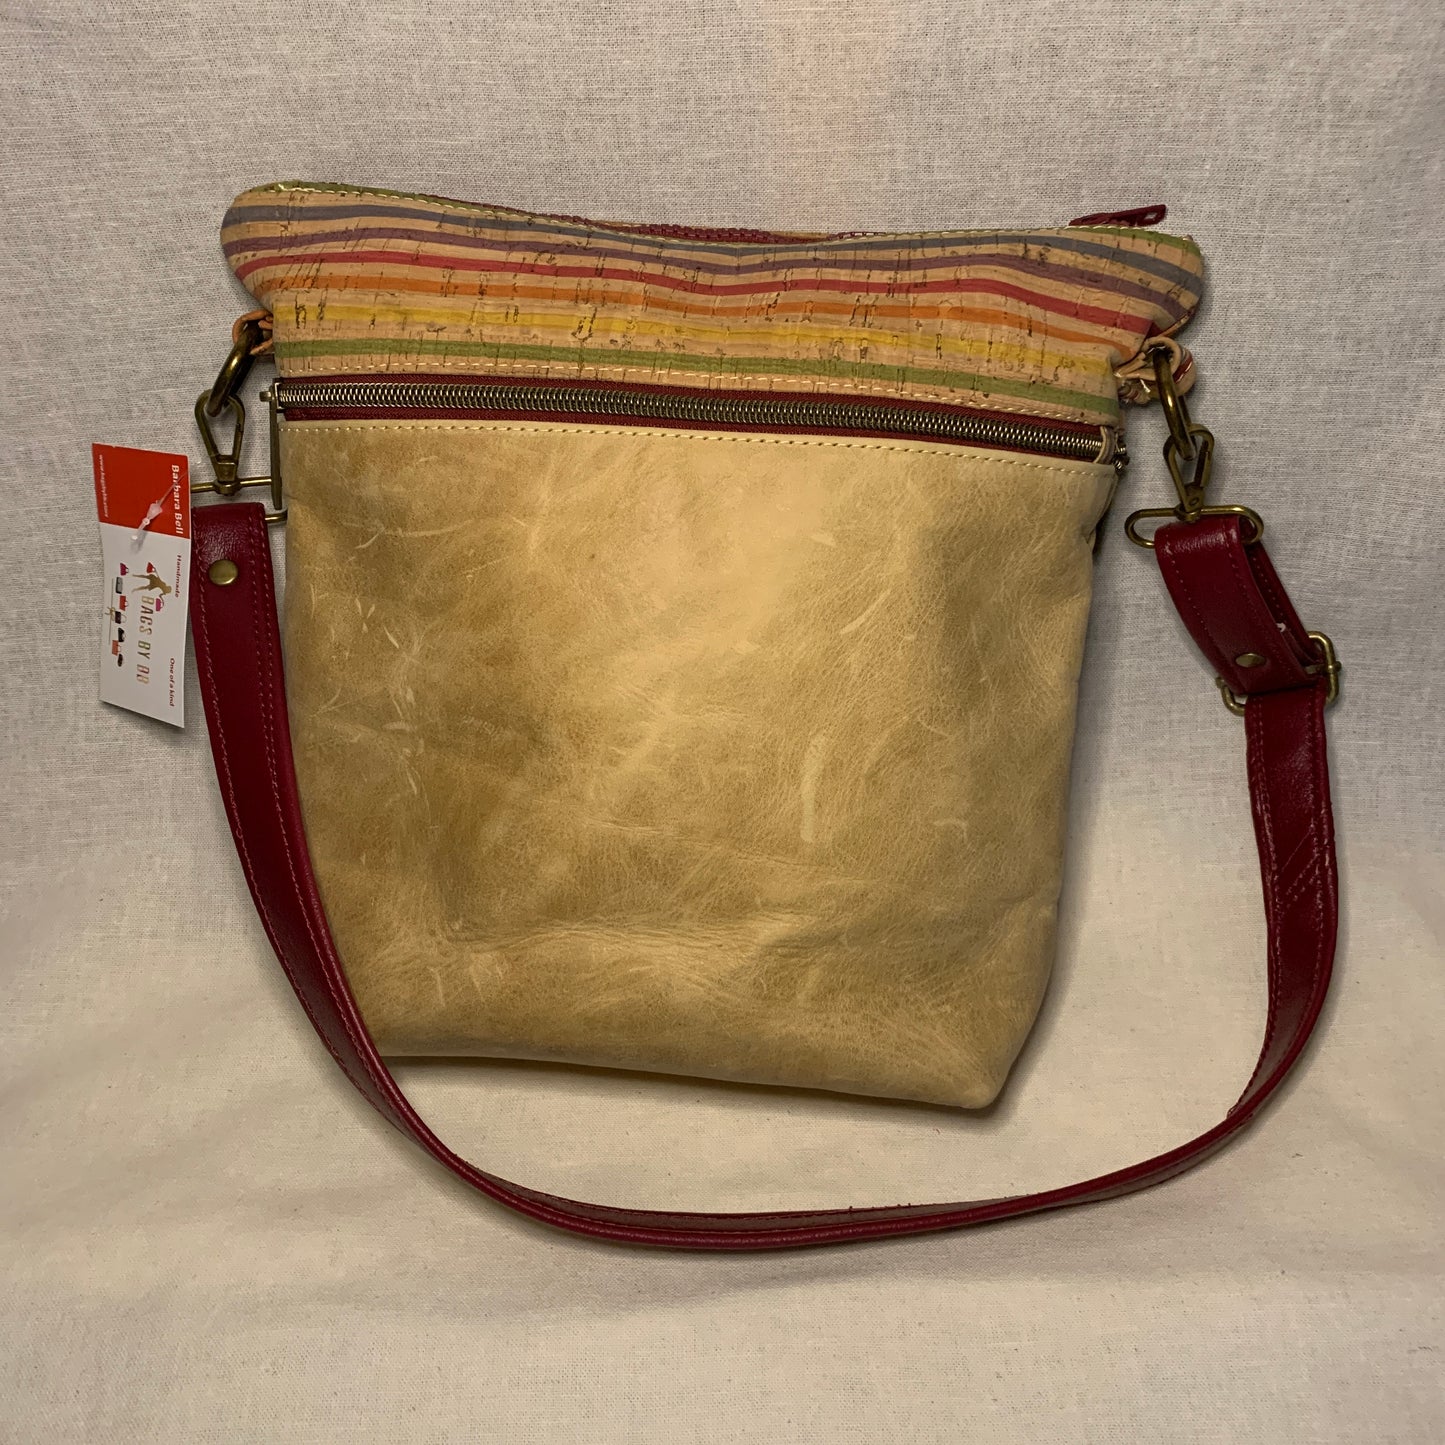 Mixed media crossbody bag of leather and cork with multiple exterior zipper pockets.